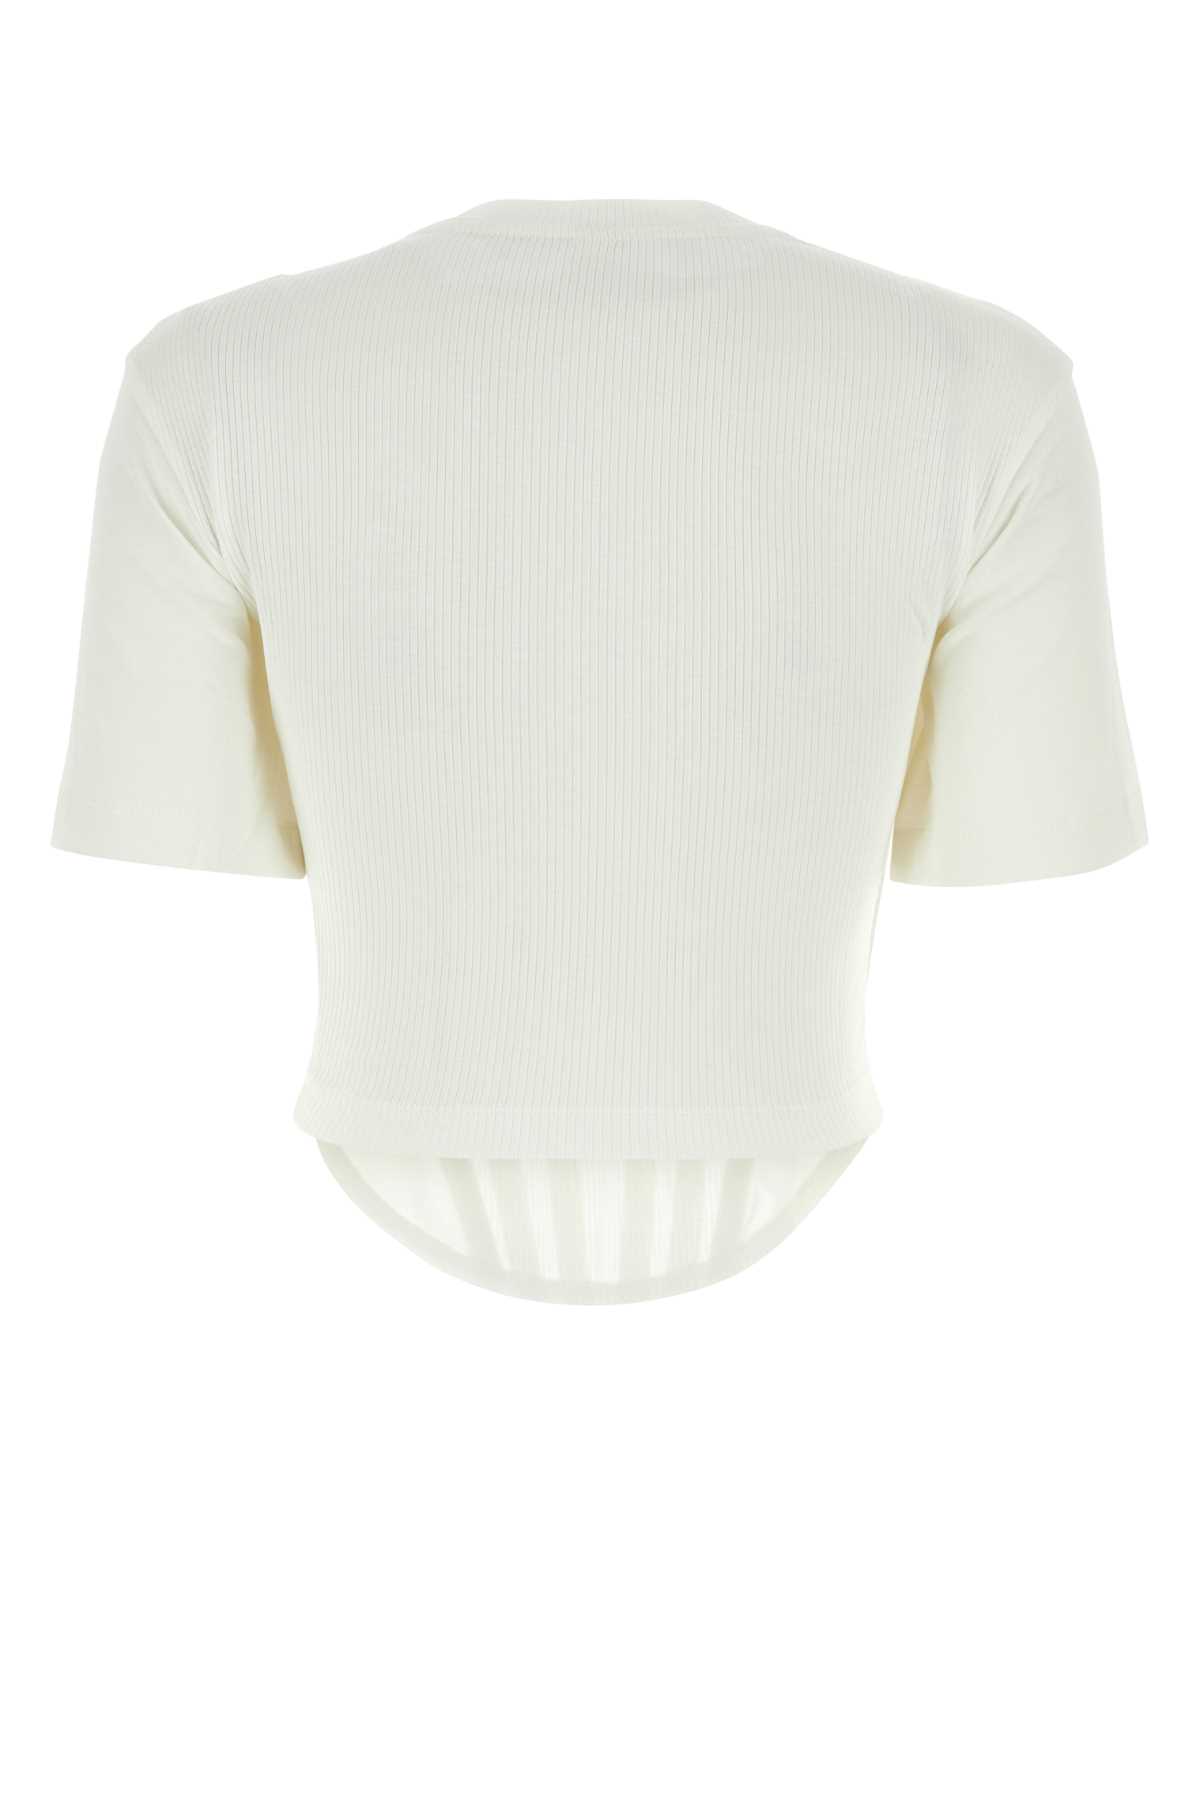 Dion Lee White Cotton T-shirt In Ivory